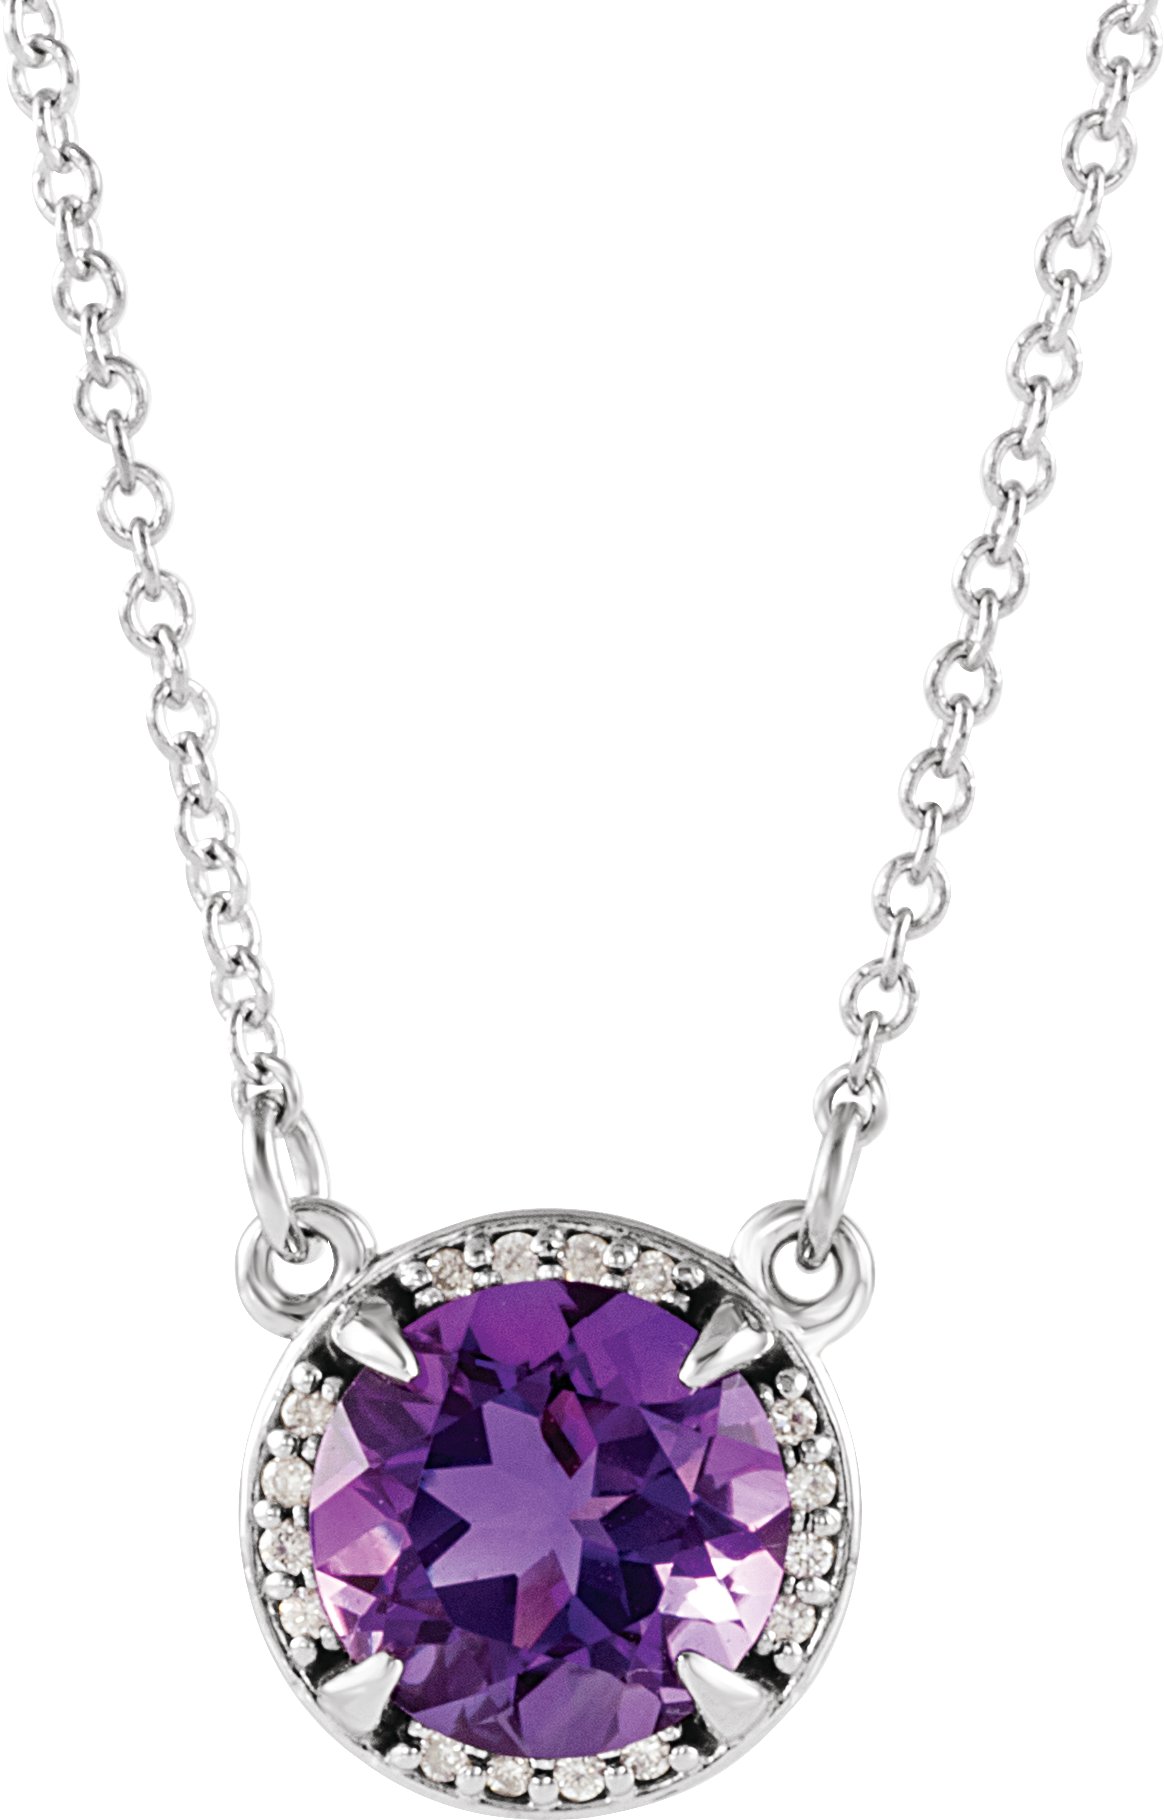 14K White 7 mm Round Amethyst and .04 CTW Diamond 16 inch Necklace Ref 13127172